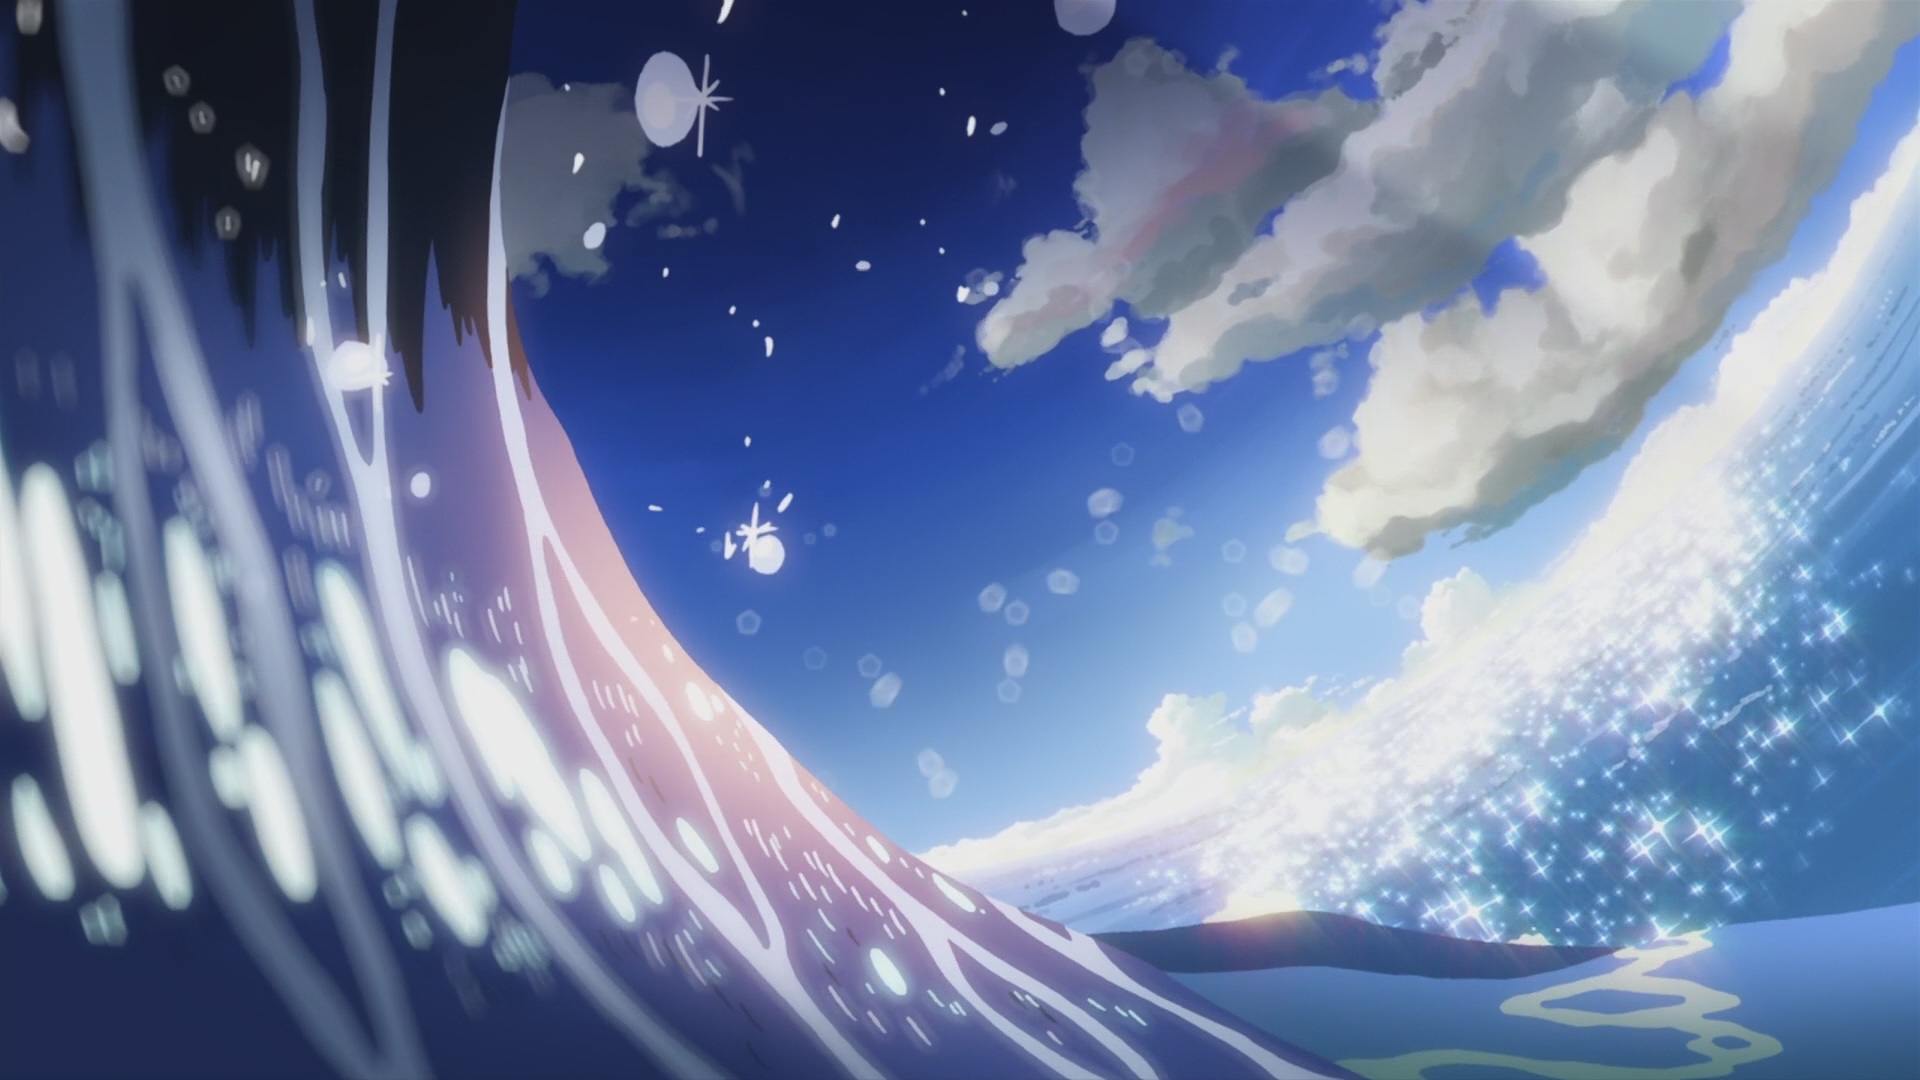  Centimeters Per Second Full HD Wallpaper and Background